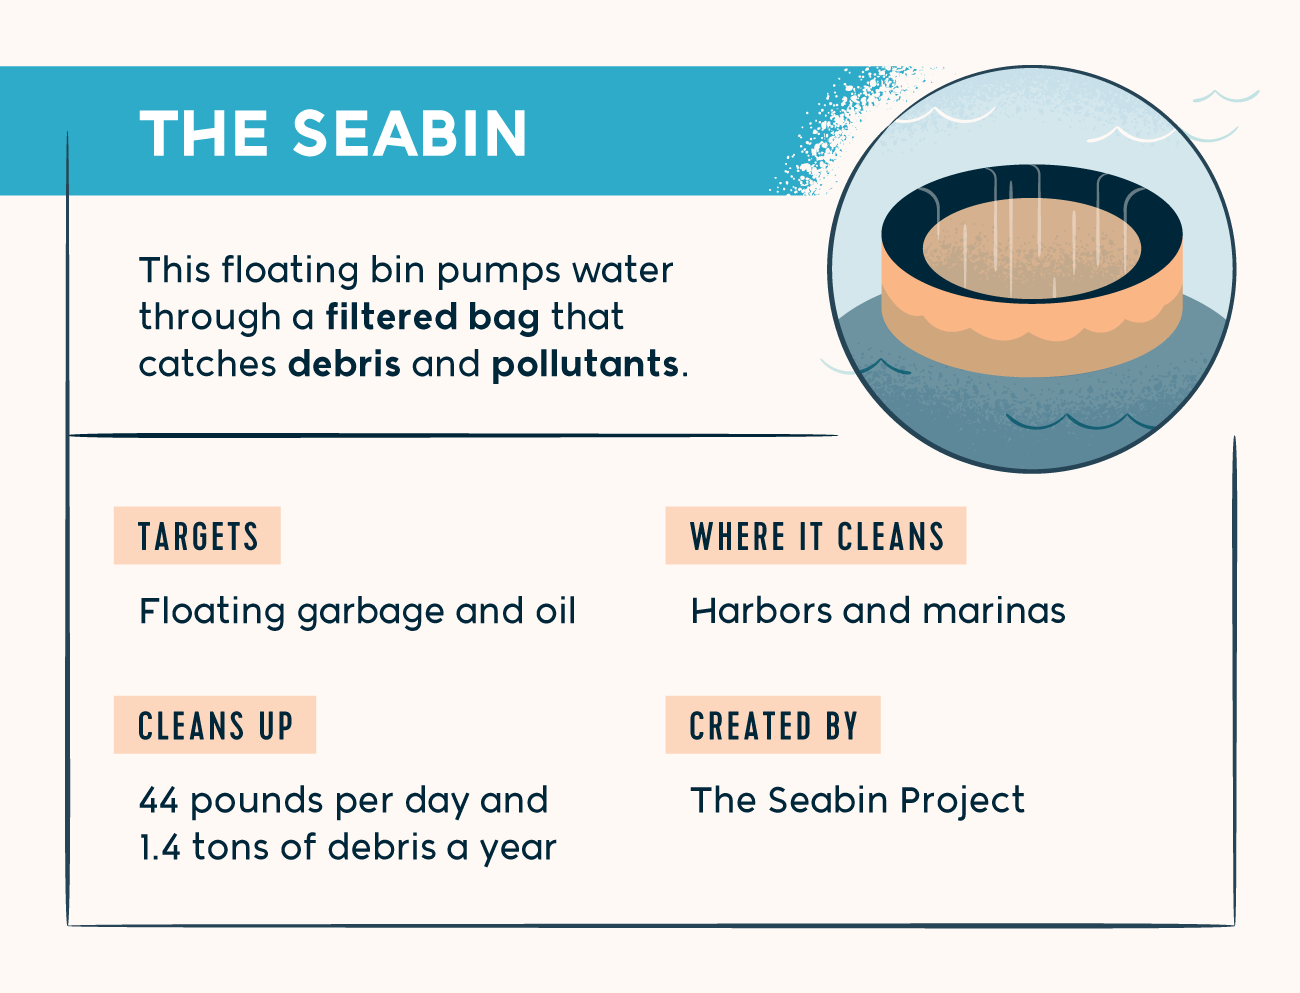 the seabin pumps water through a filtered bag that catches debris